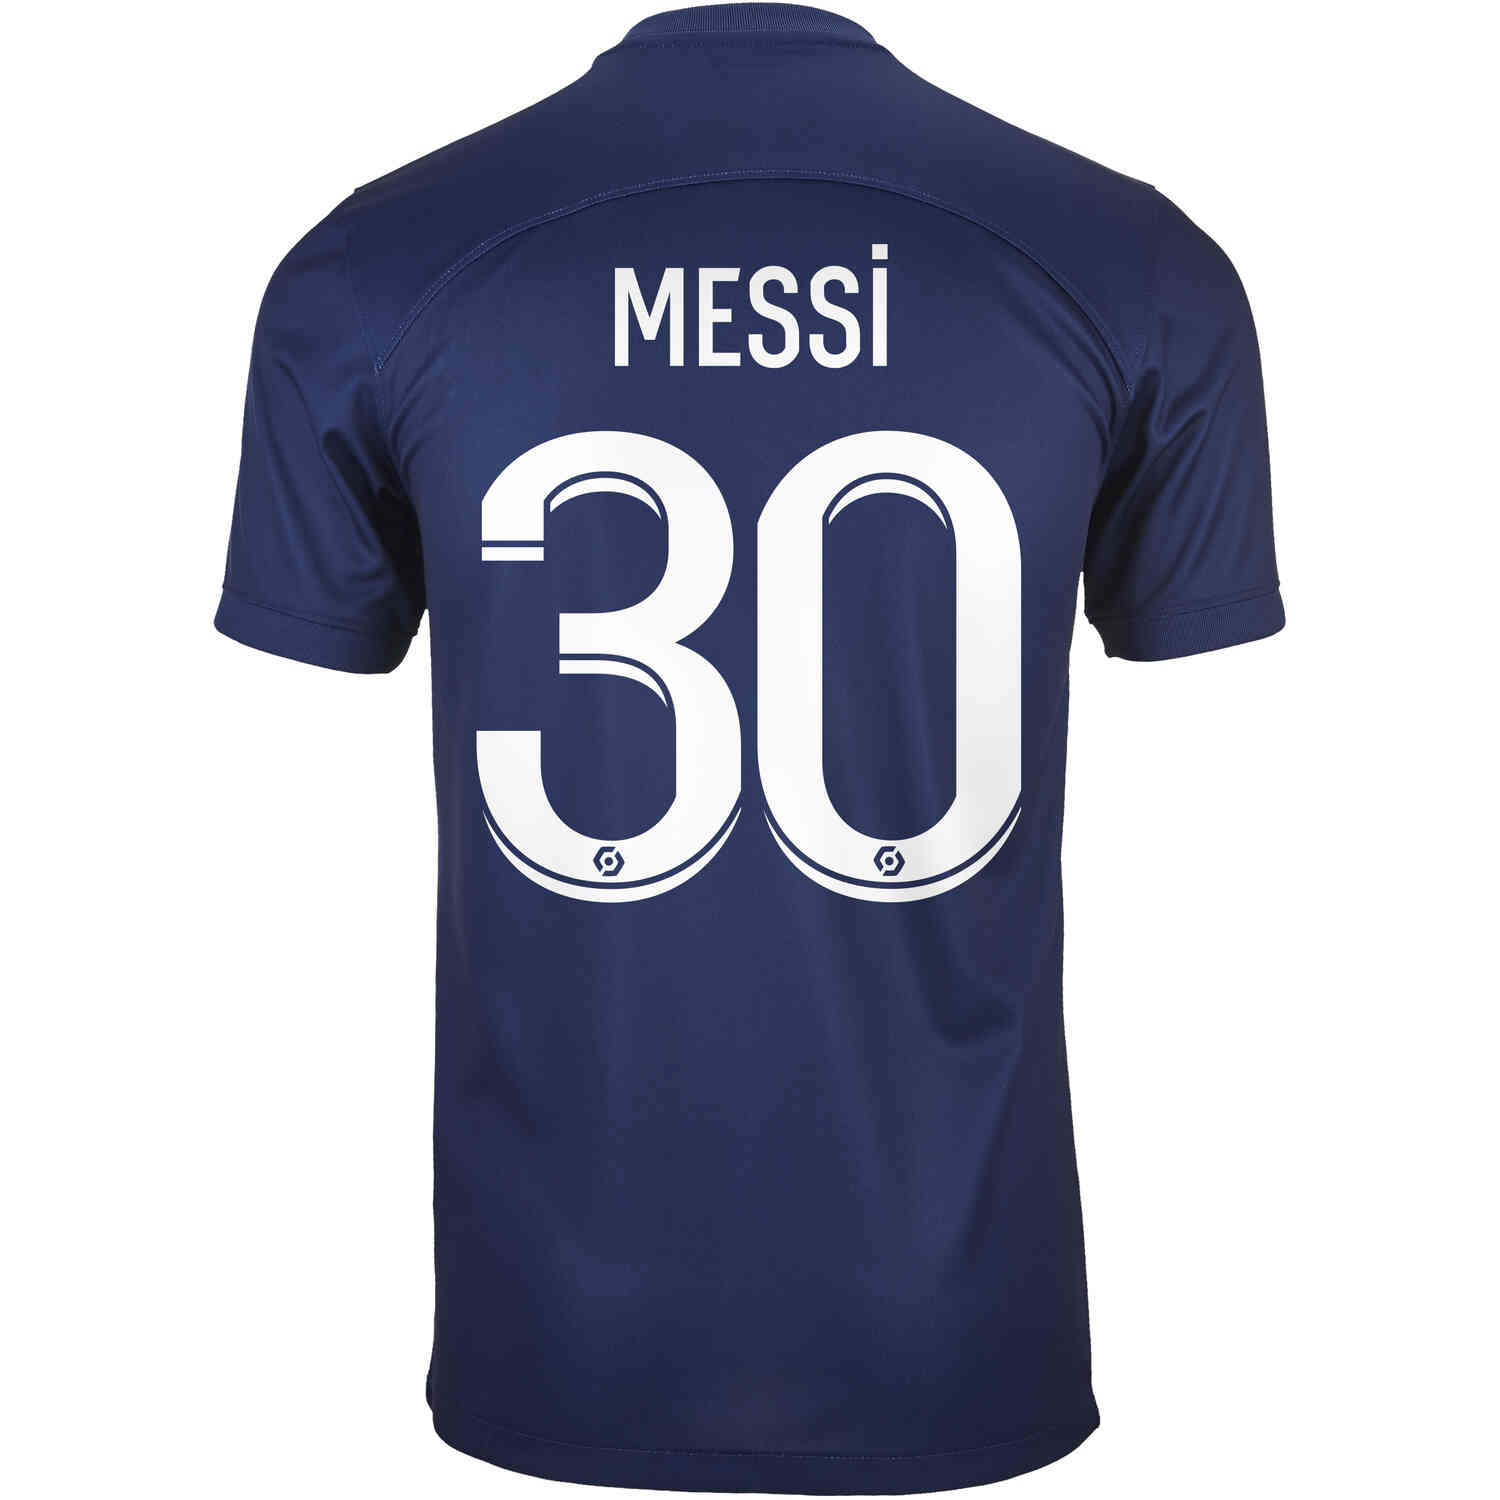 Shop for Your 2022/2023 Lionel Messi Jerseys